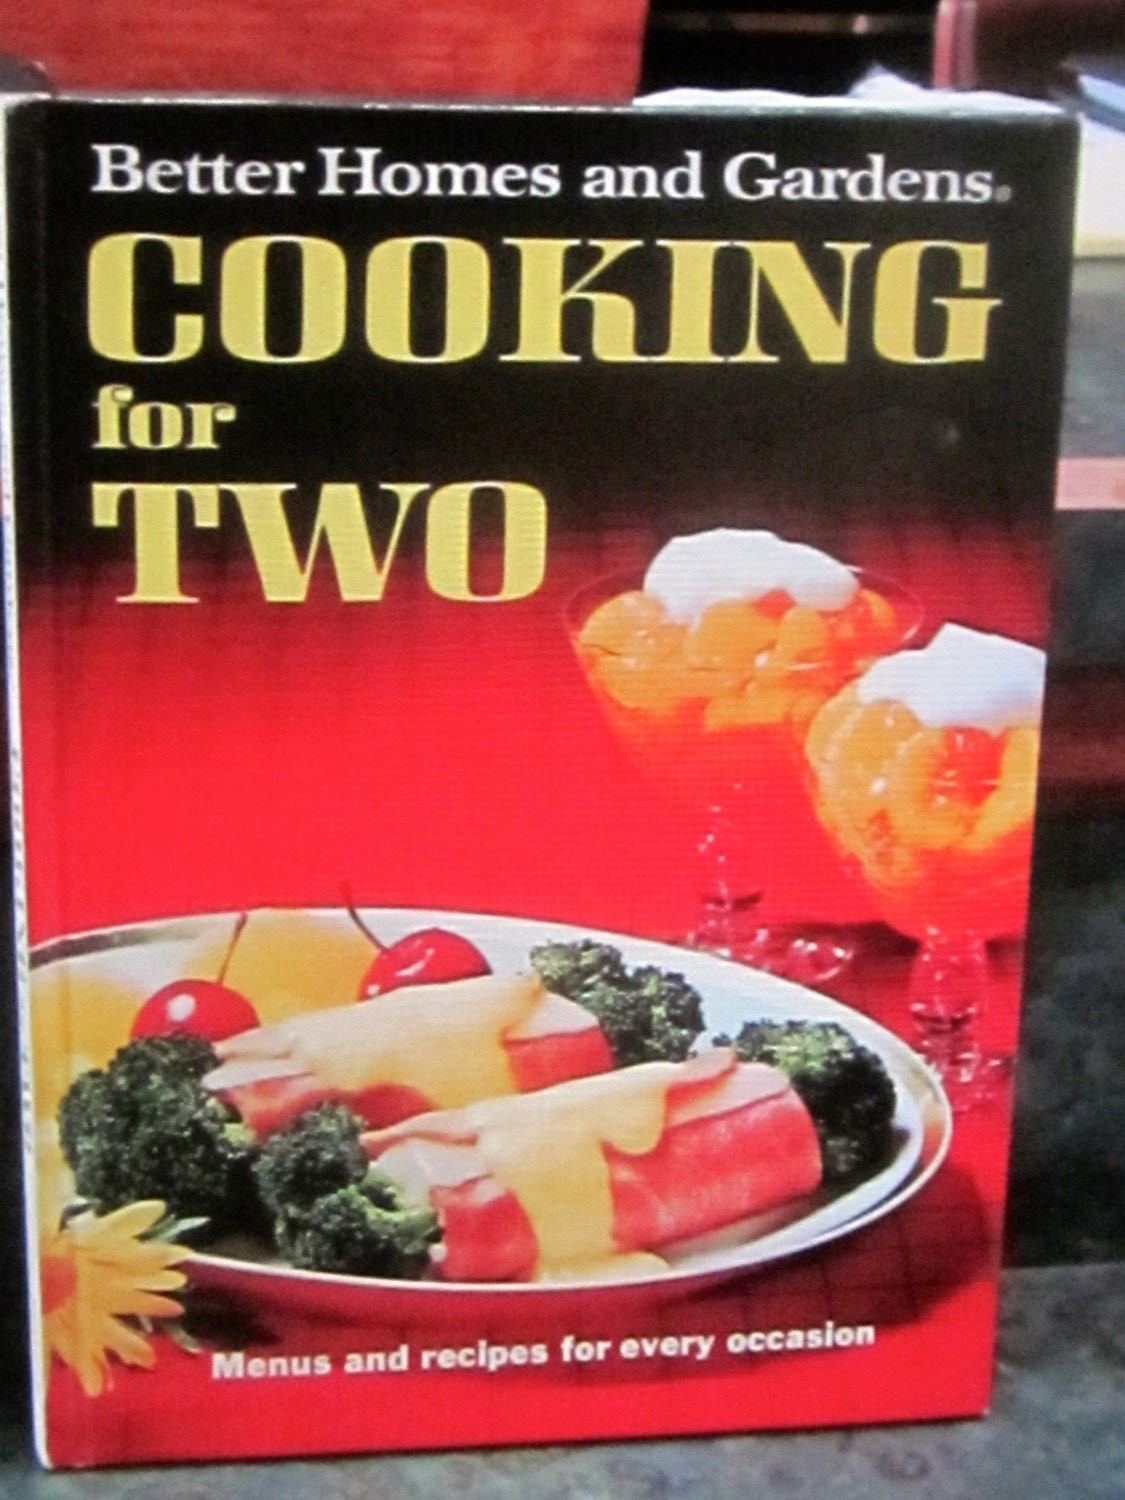 Cooking for Two Cookbook Luxury 1980 Cooking for Two Cookbook Better Homes and Gardens